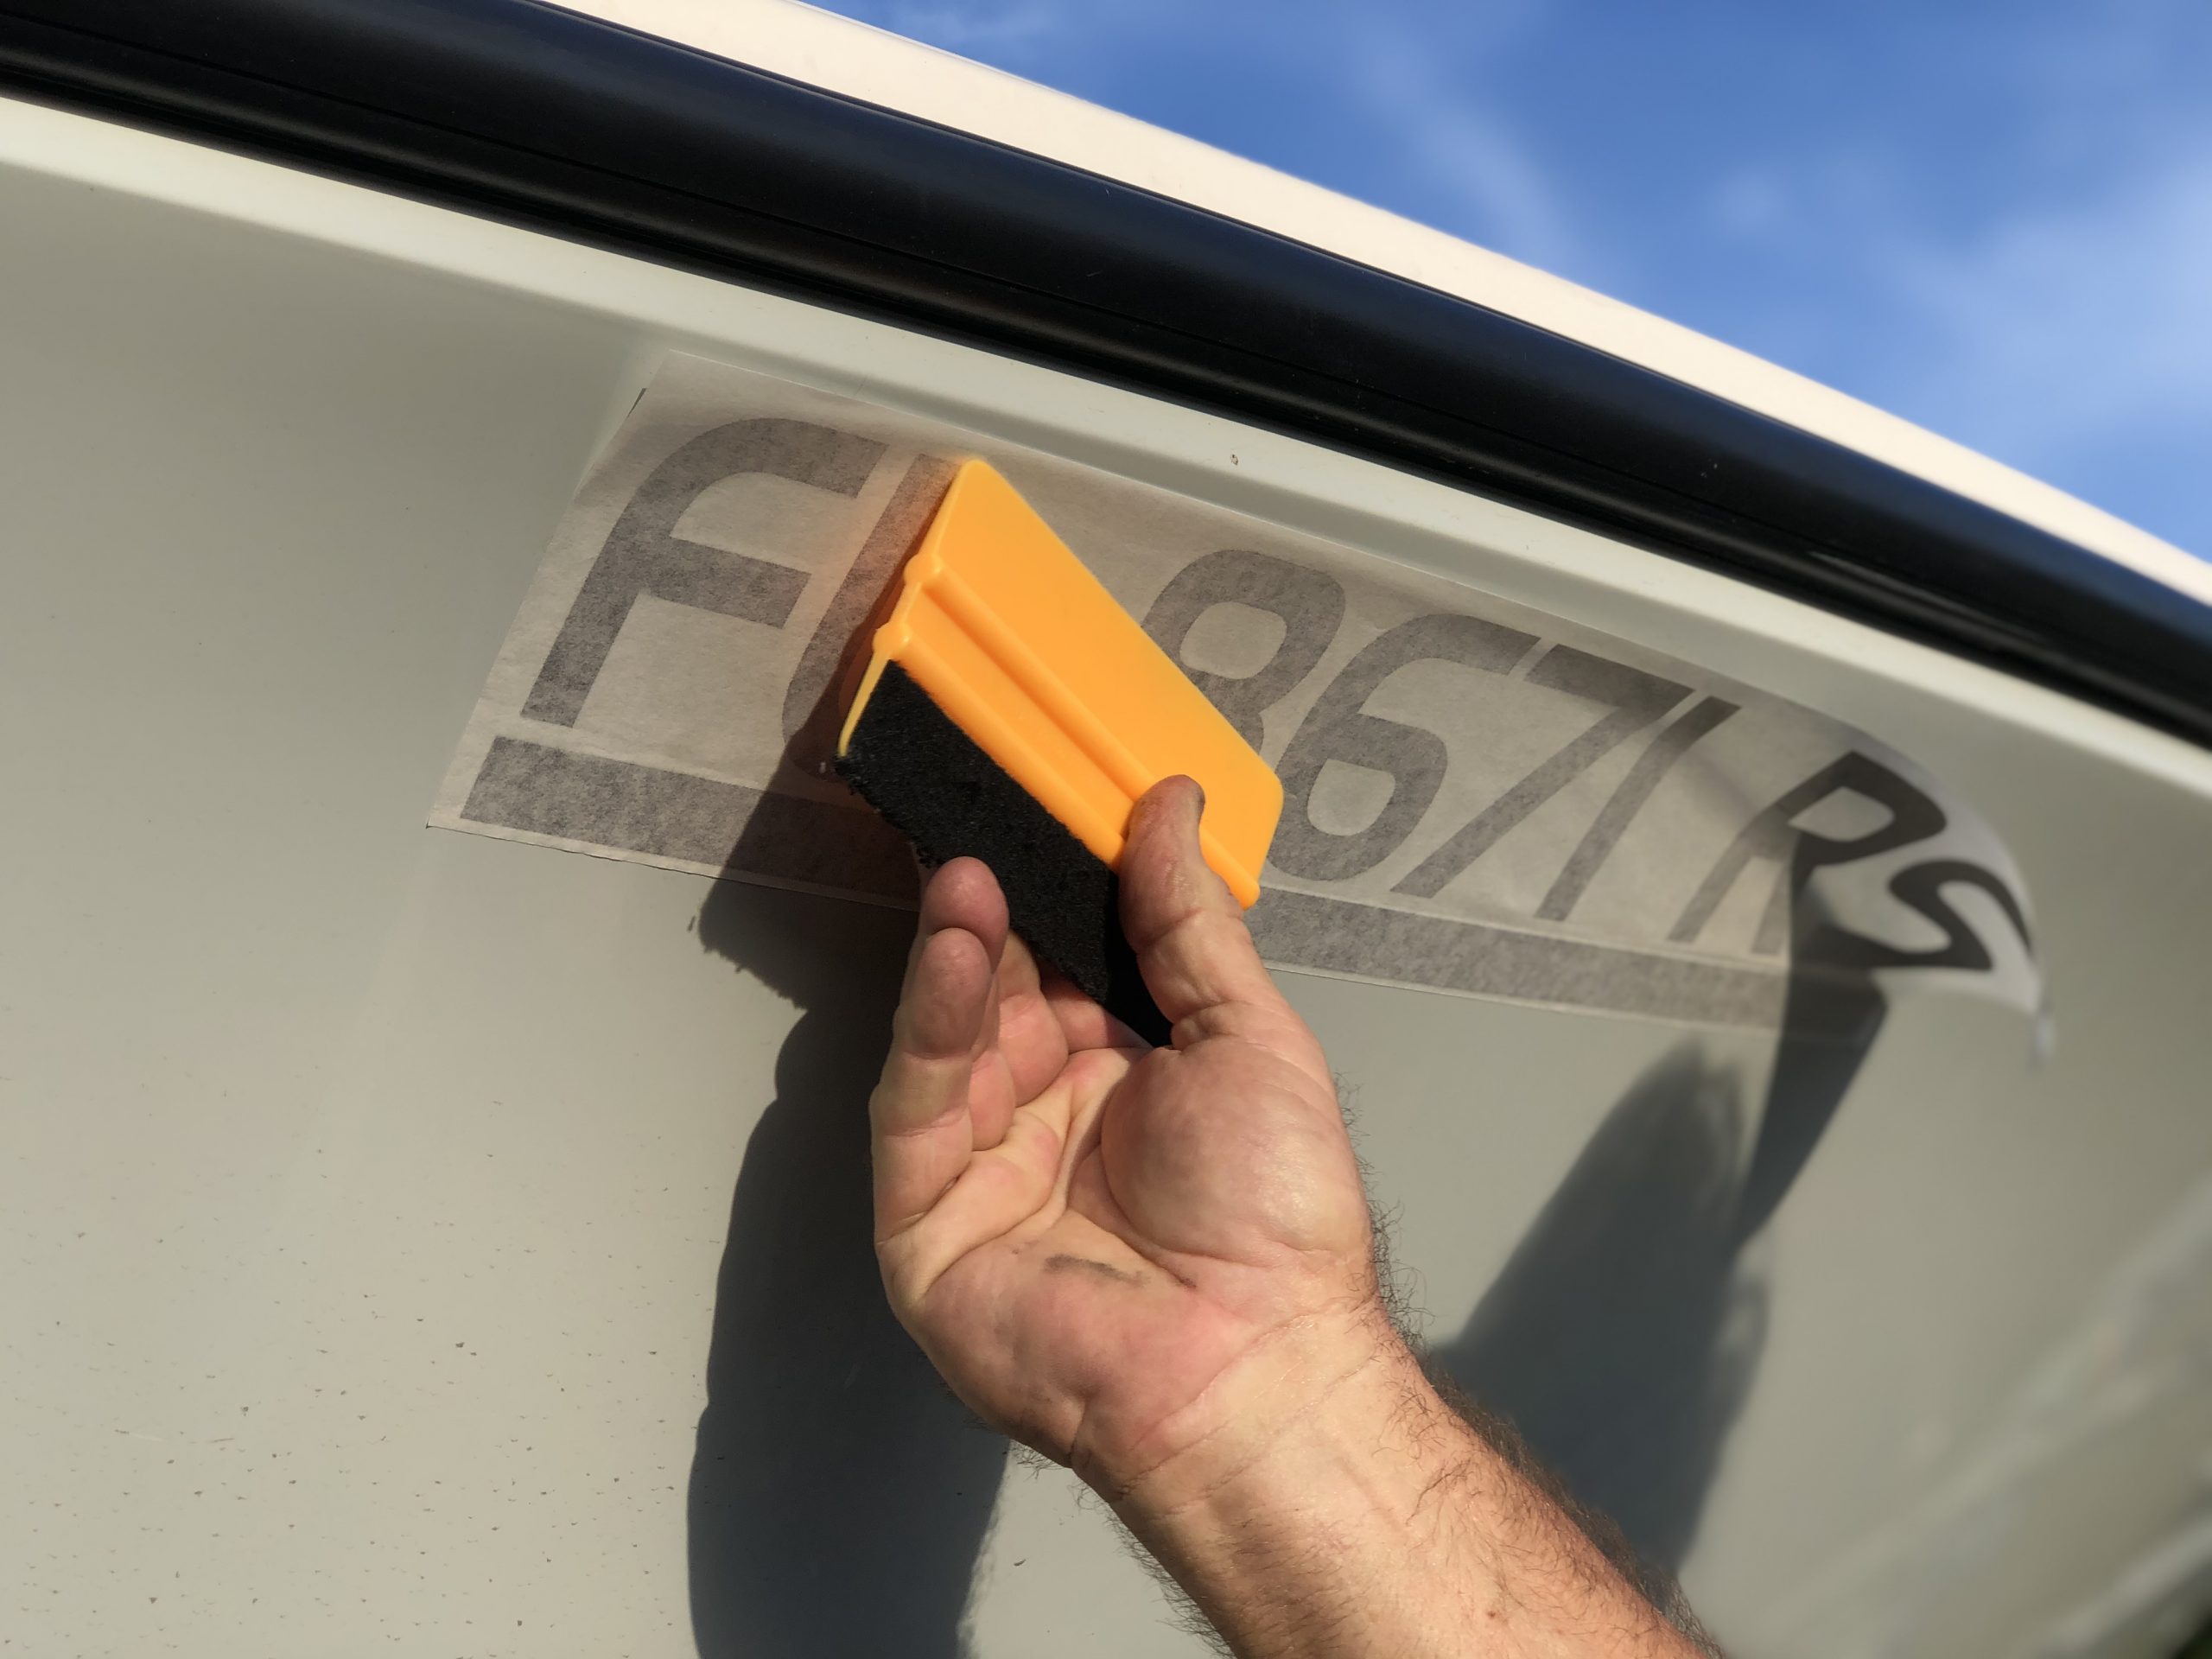 MarineReg squeegee affixing numbers